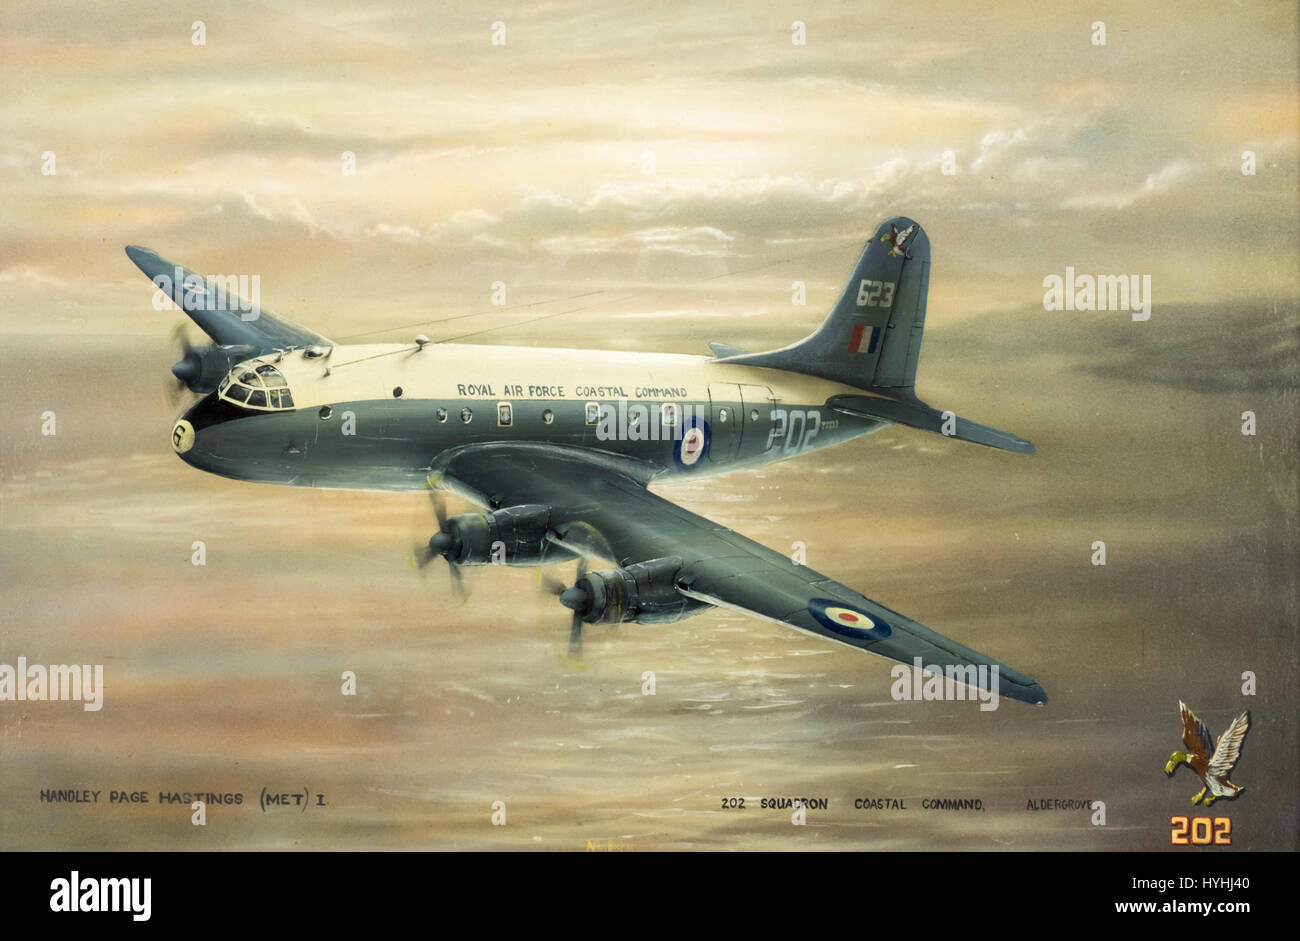 Painting of Handley Page Hastings HP.67 MET Mk1 weather reconnaissance aircraft operated by Royal Air Force 202 Squadron Coastal Command, Aldergrove Stock Photo